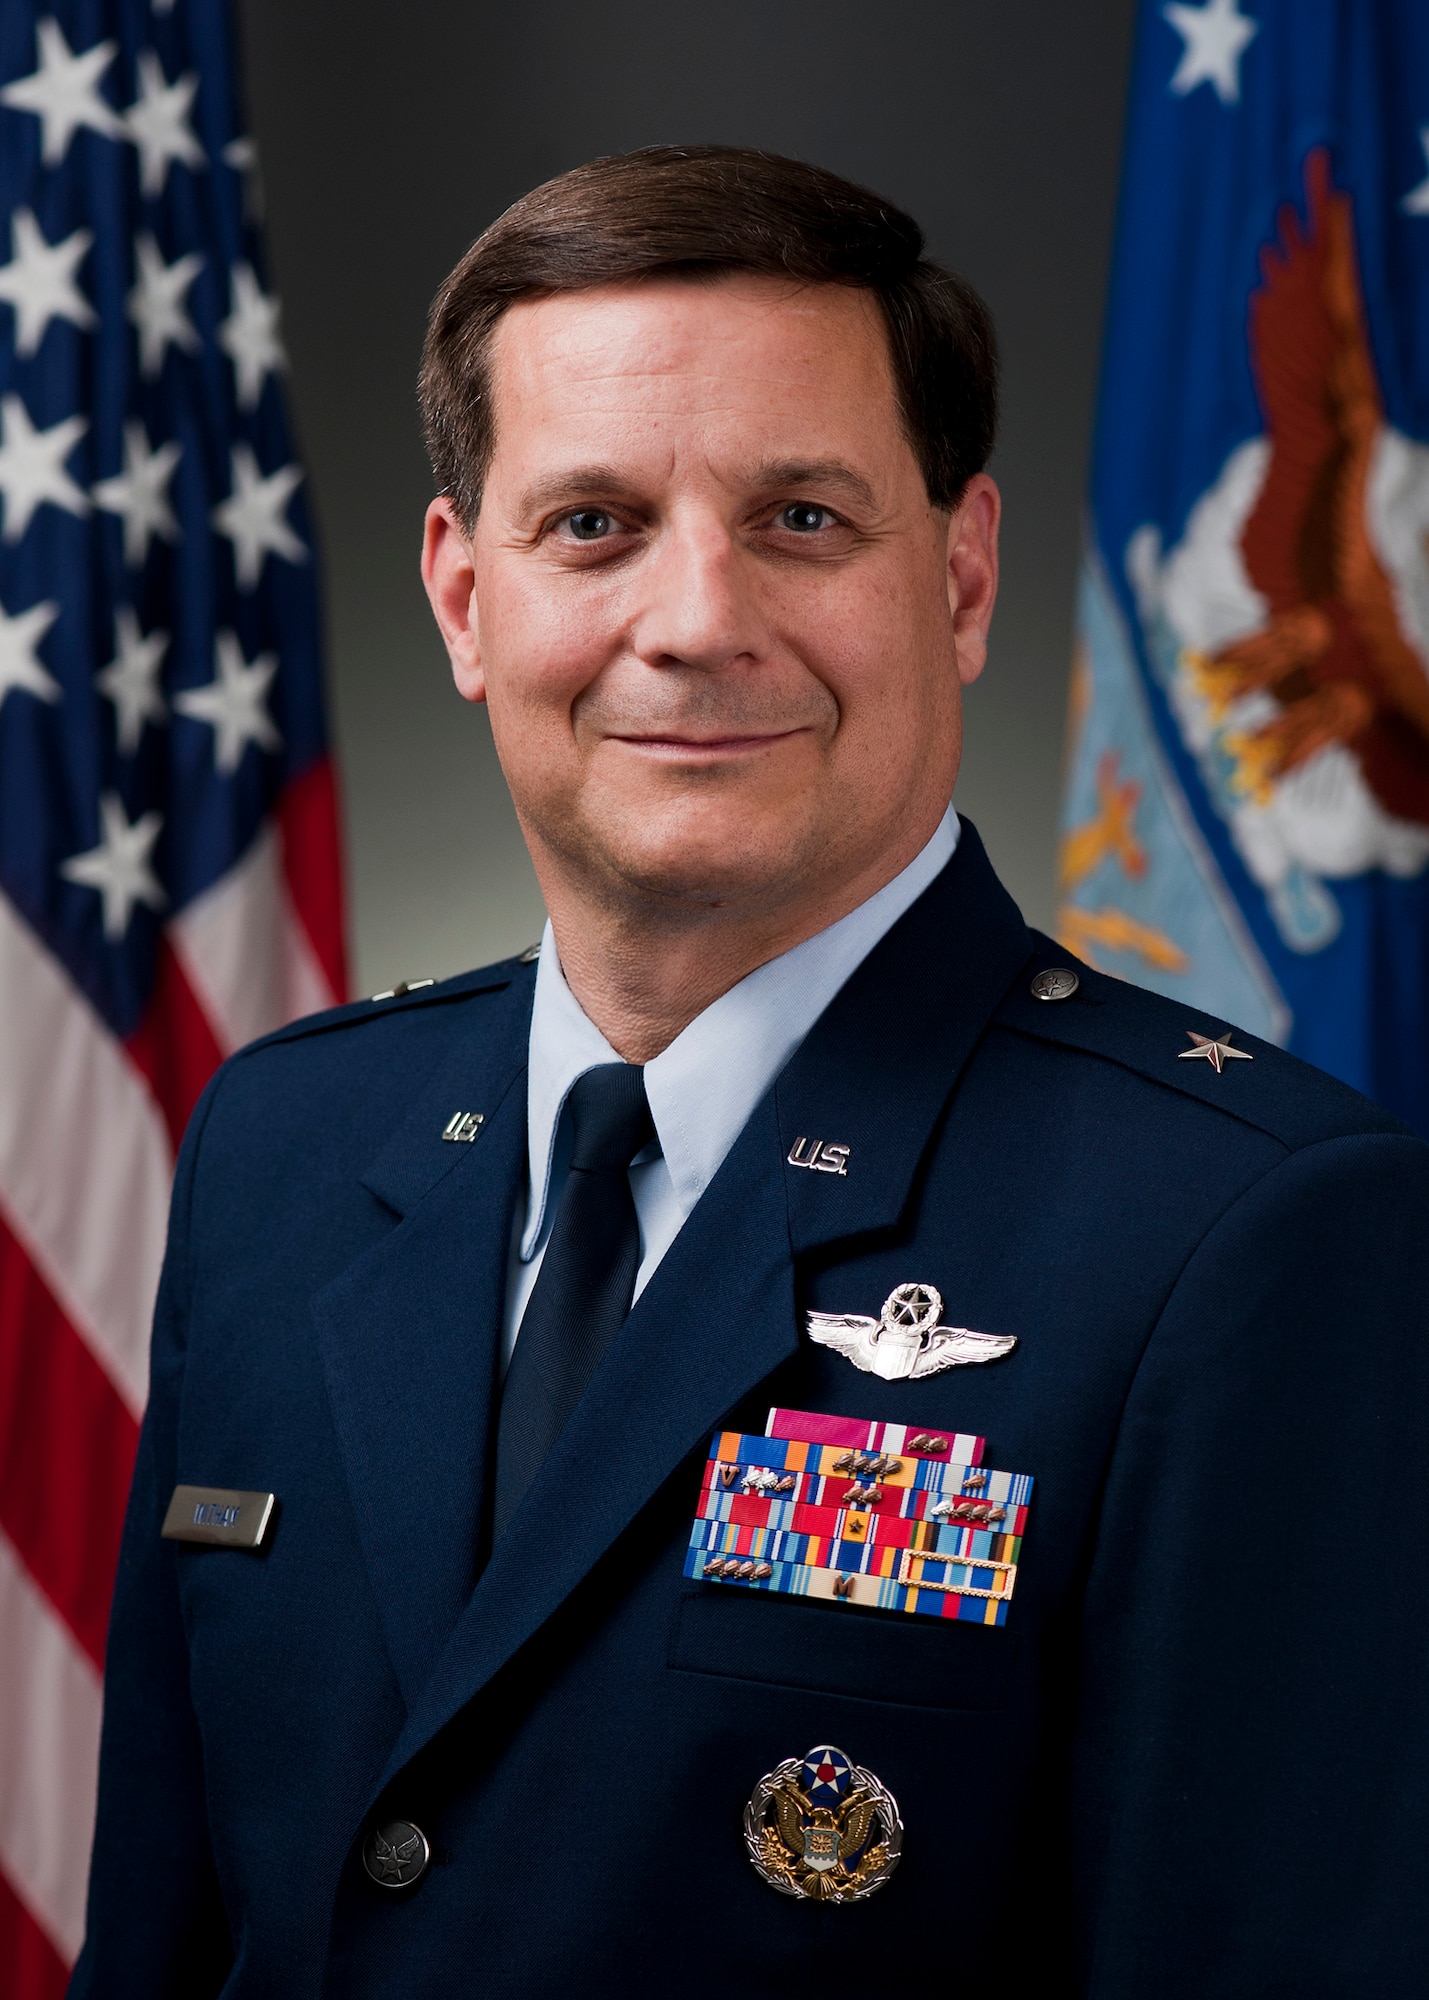 Brigadier General James C. “JC” Witham has been named the next Deputy Director of the Air National Guard.